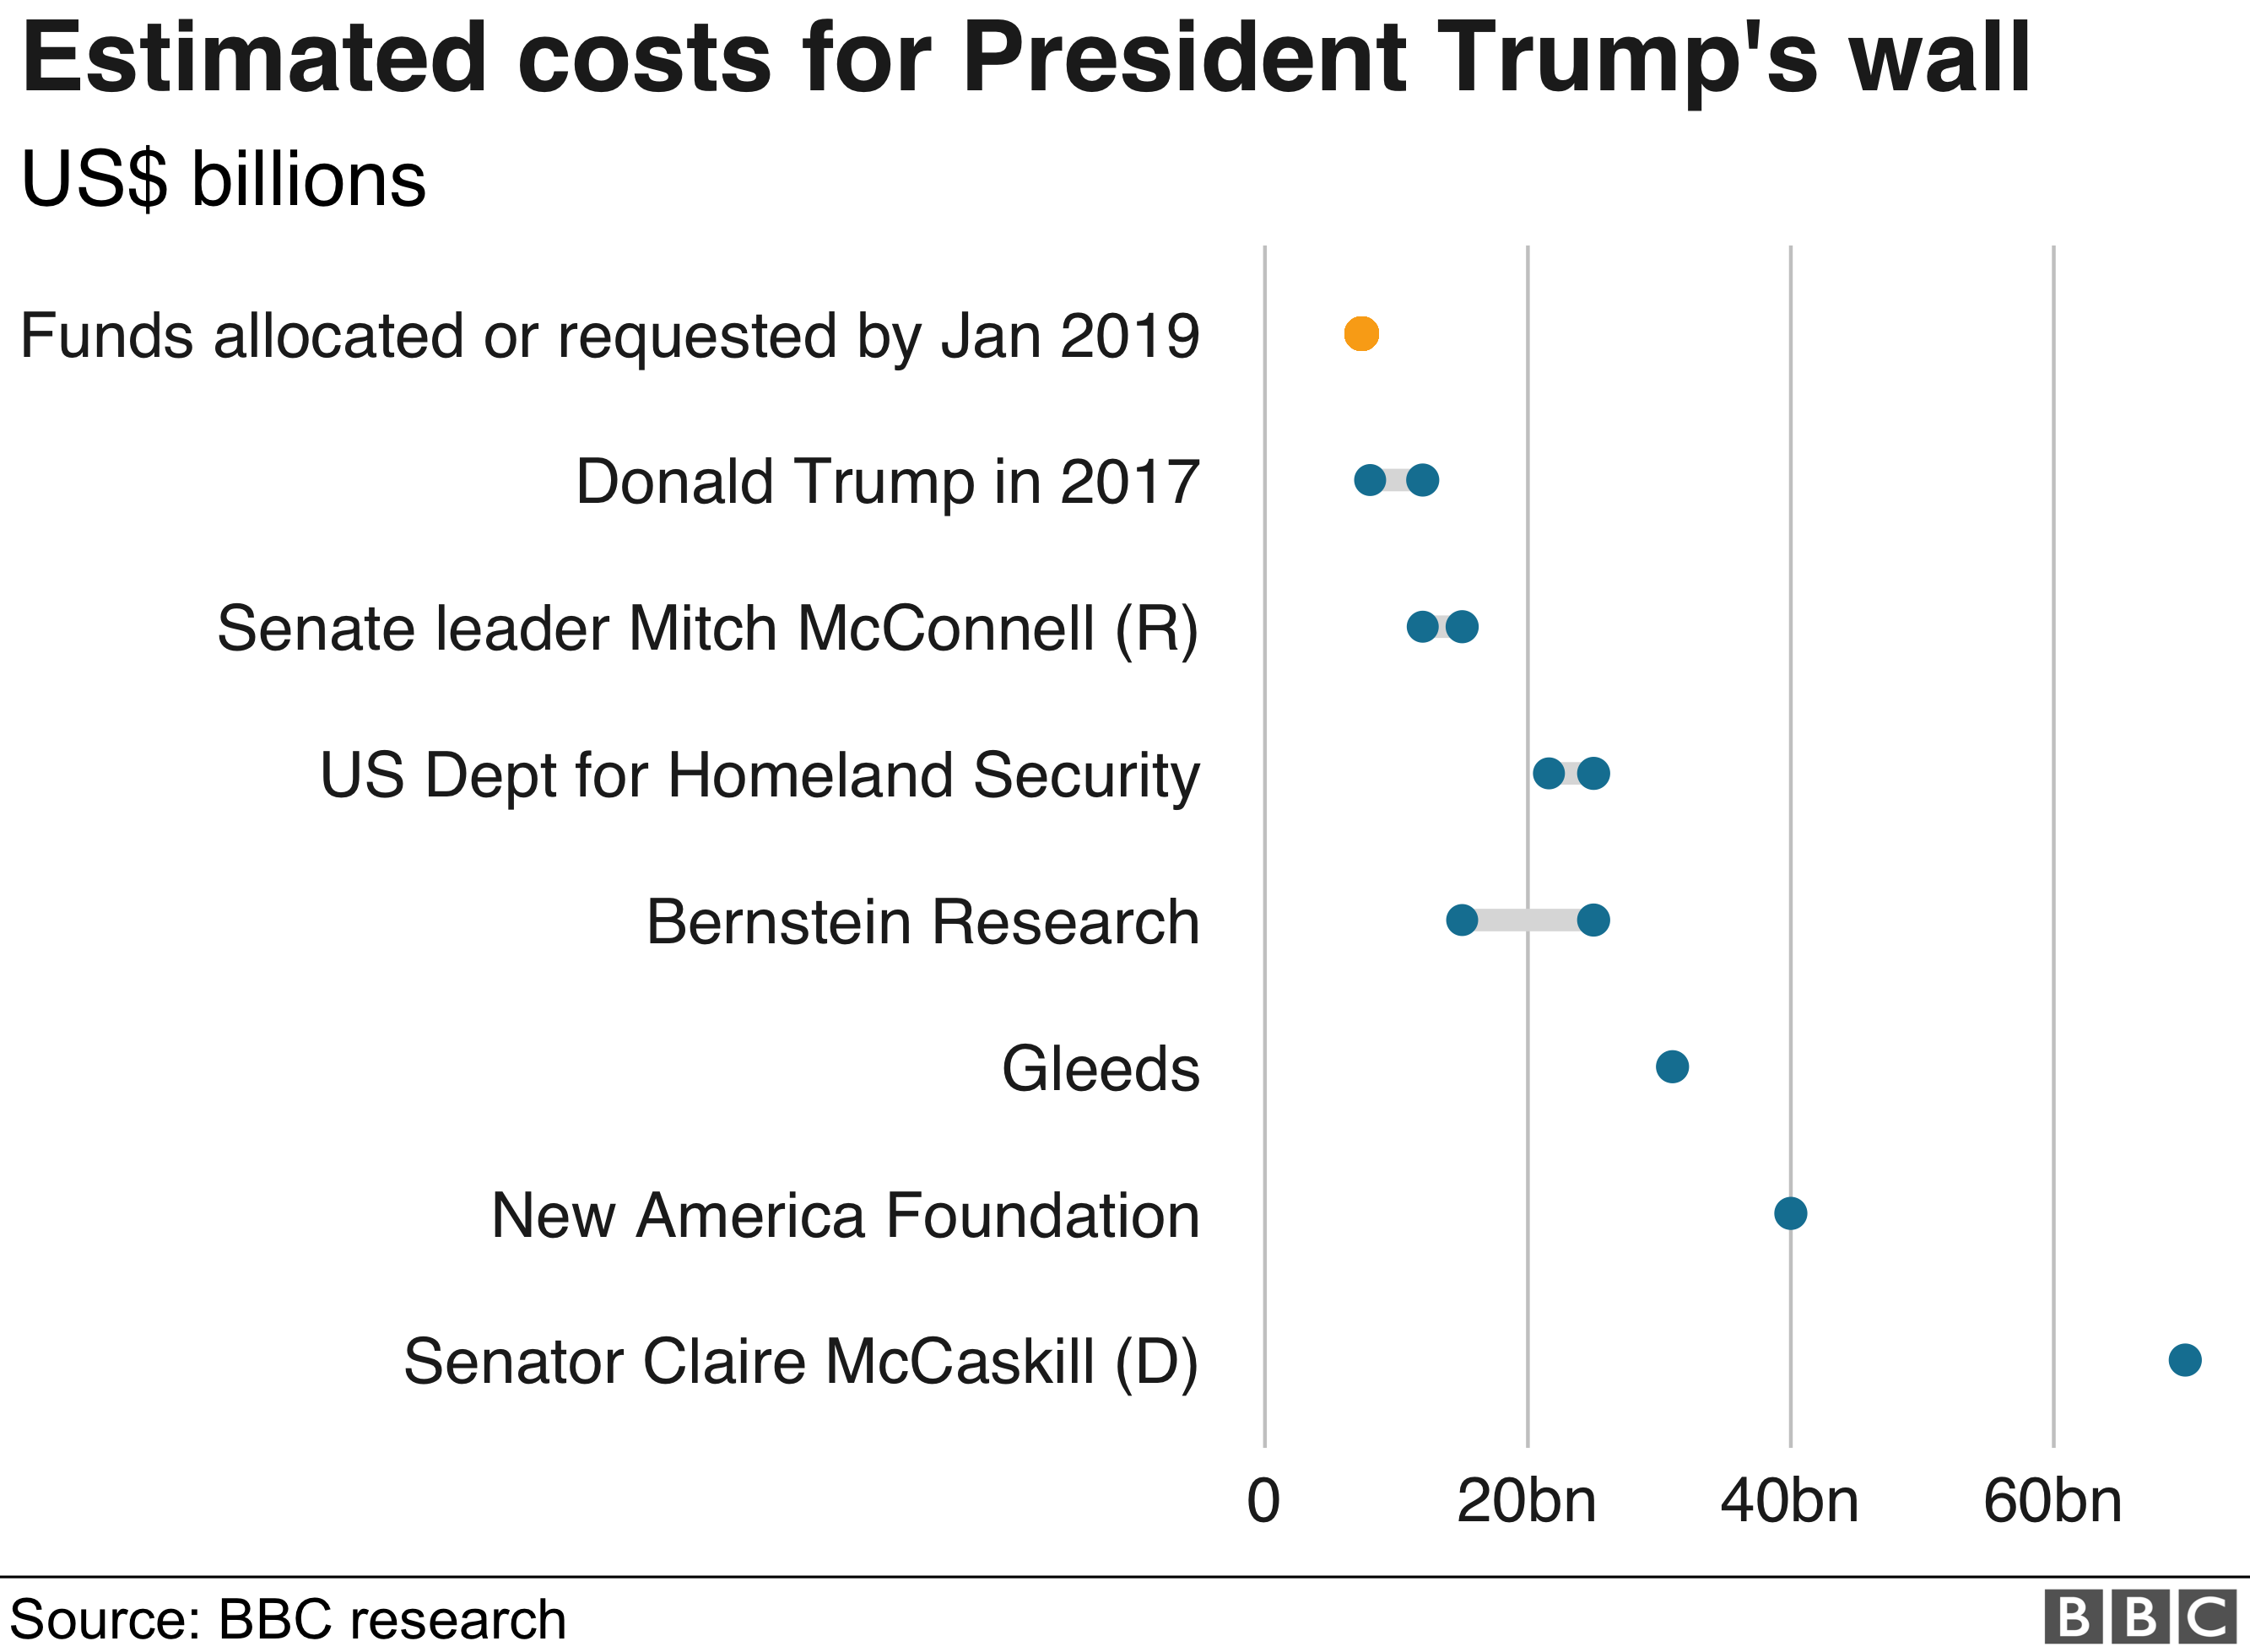 Chart showing estimated costs for President Trump's wall